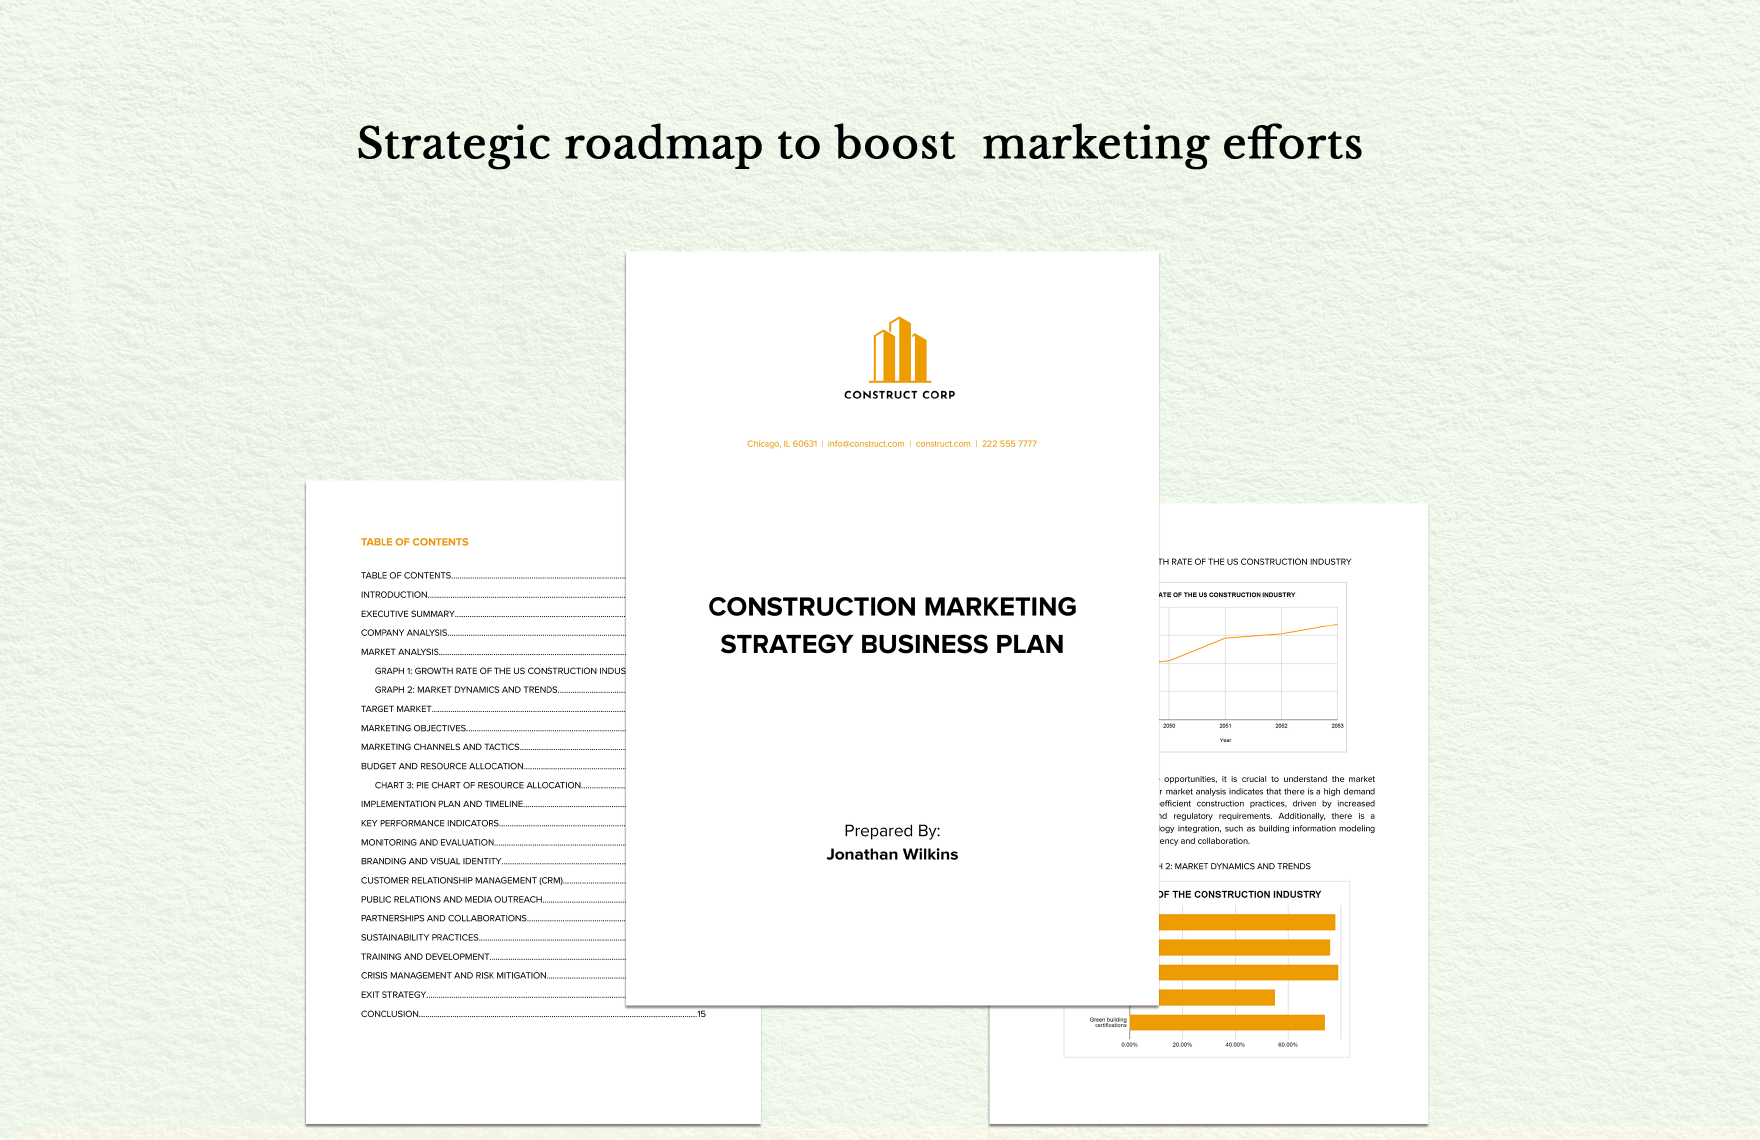 Construction Marketing Strategy Business Plan 